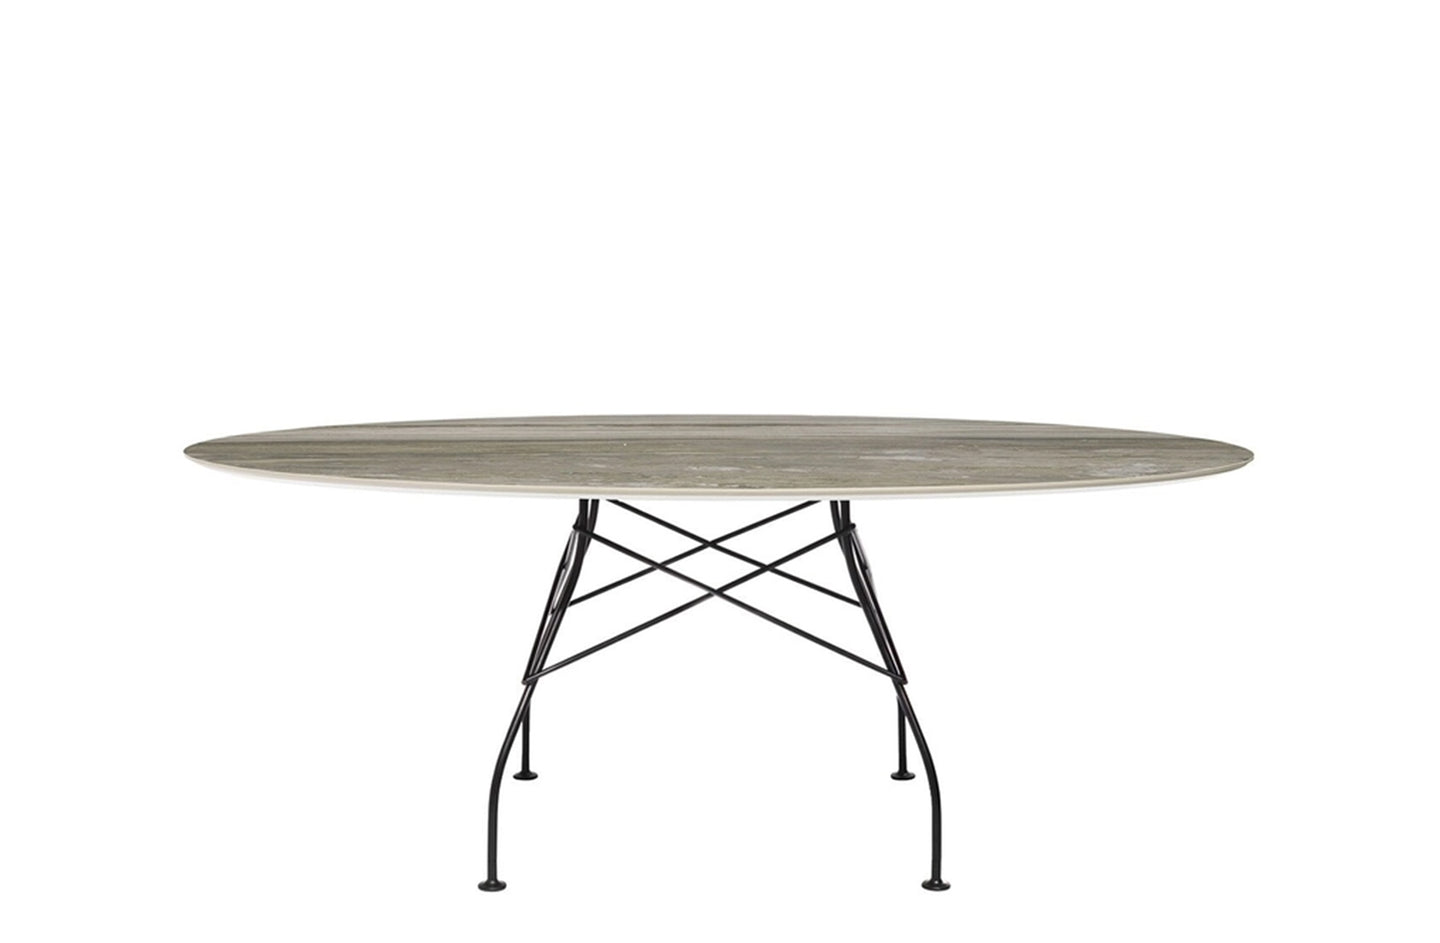 Glossy Oval Table - Stoneware
